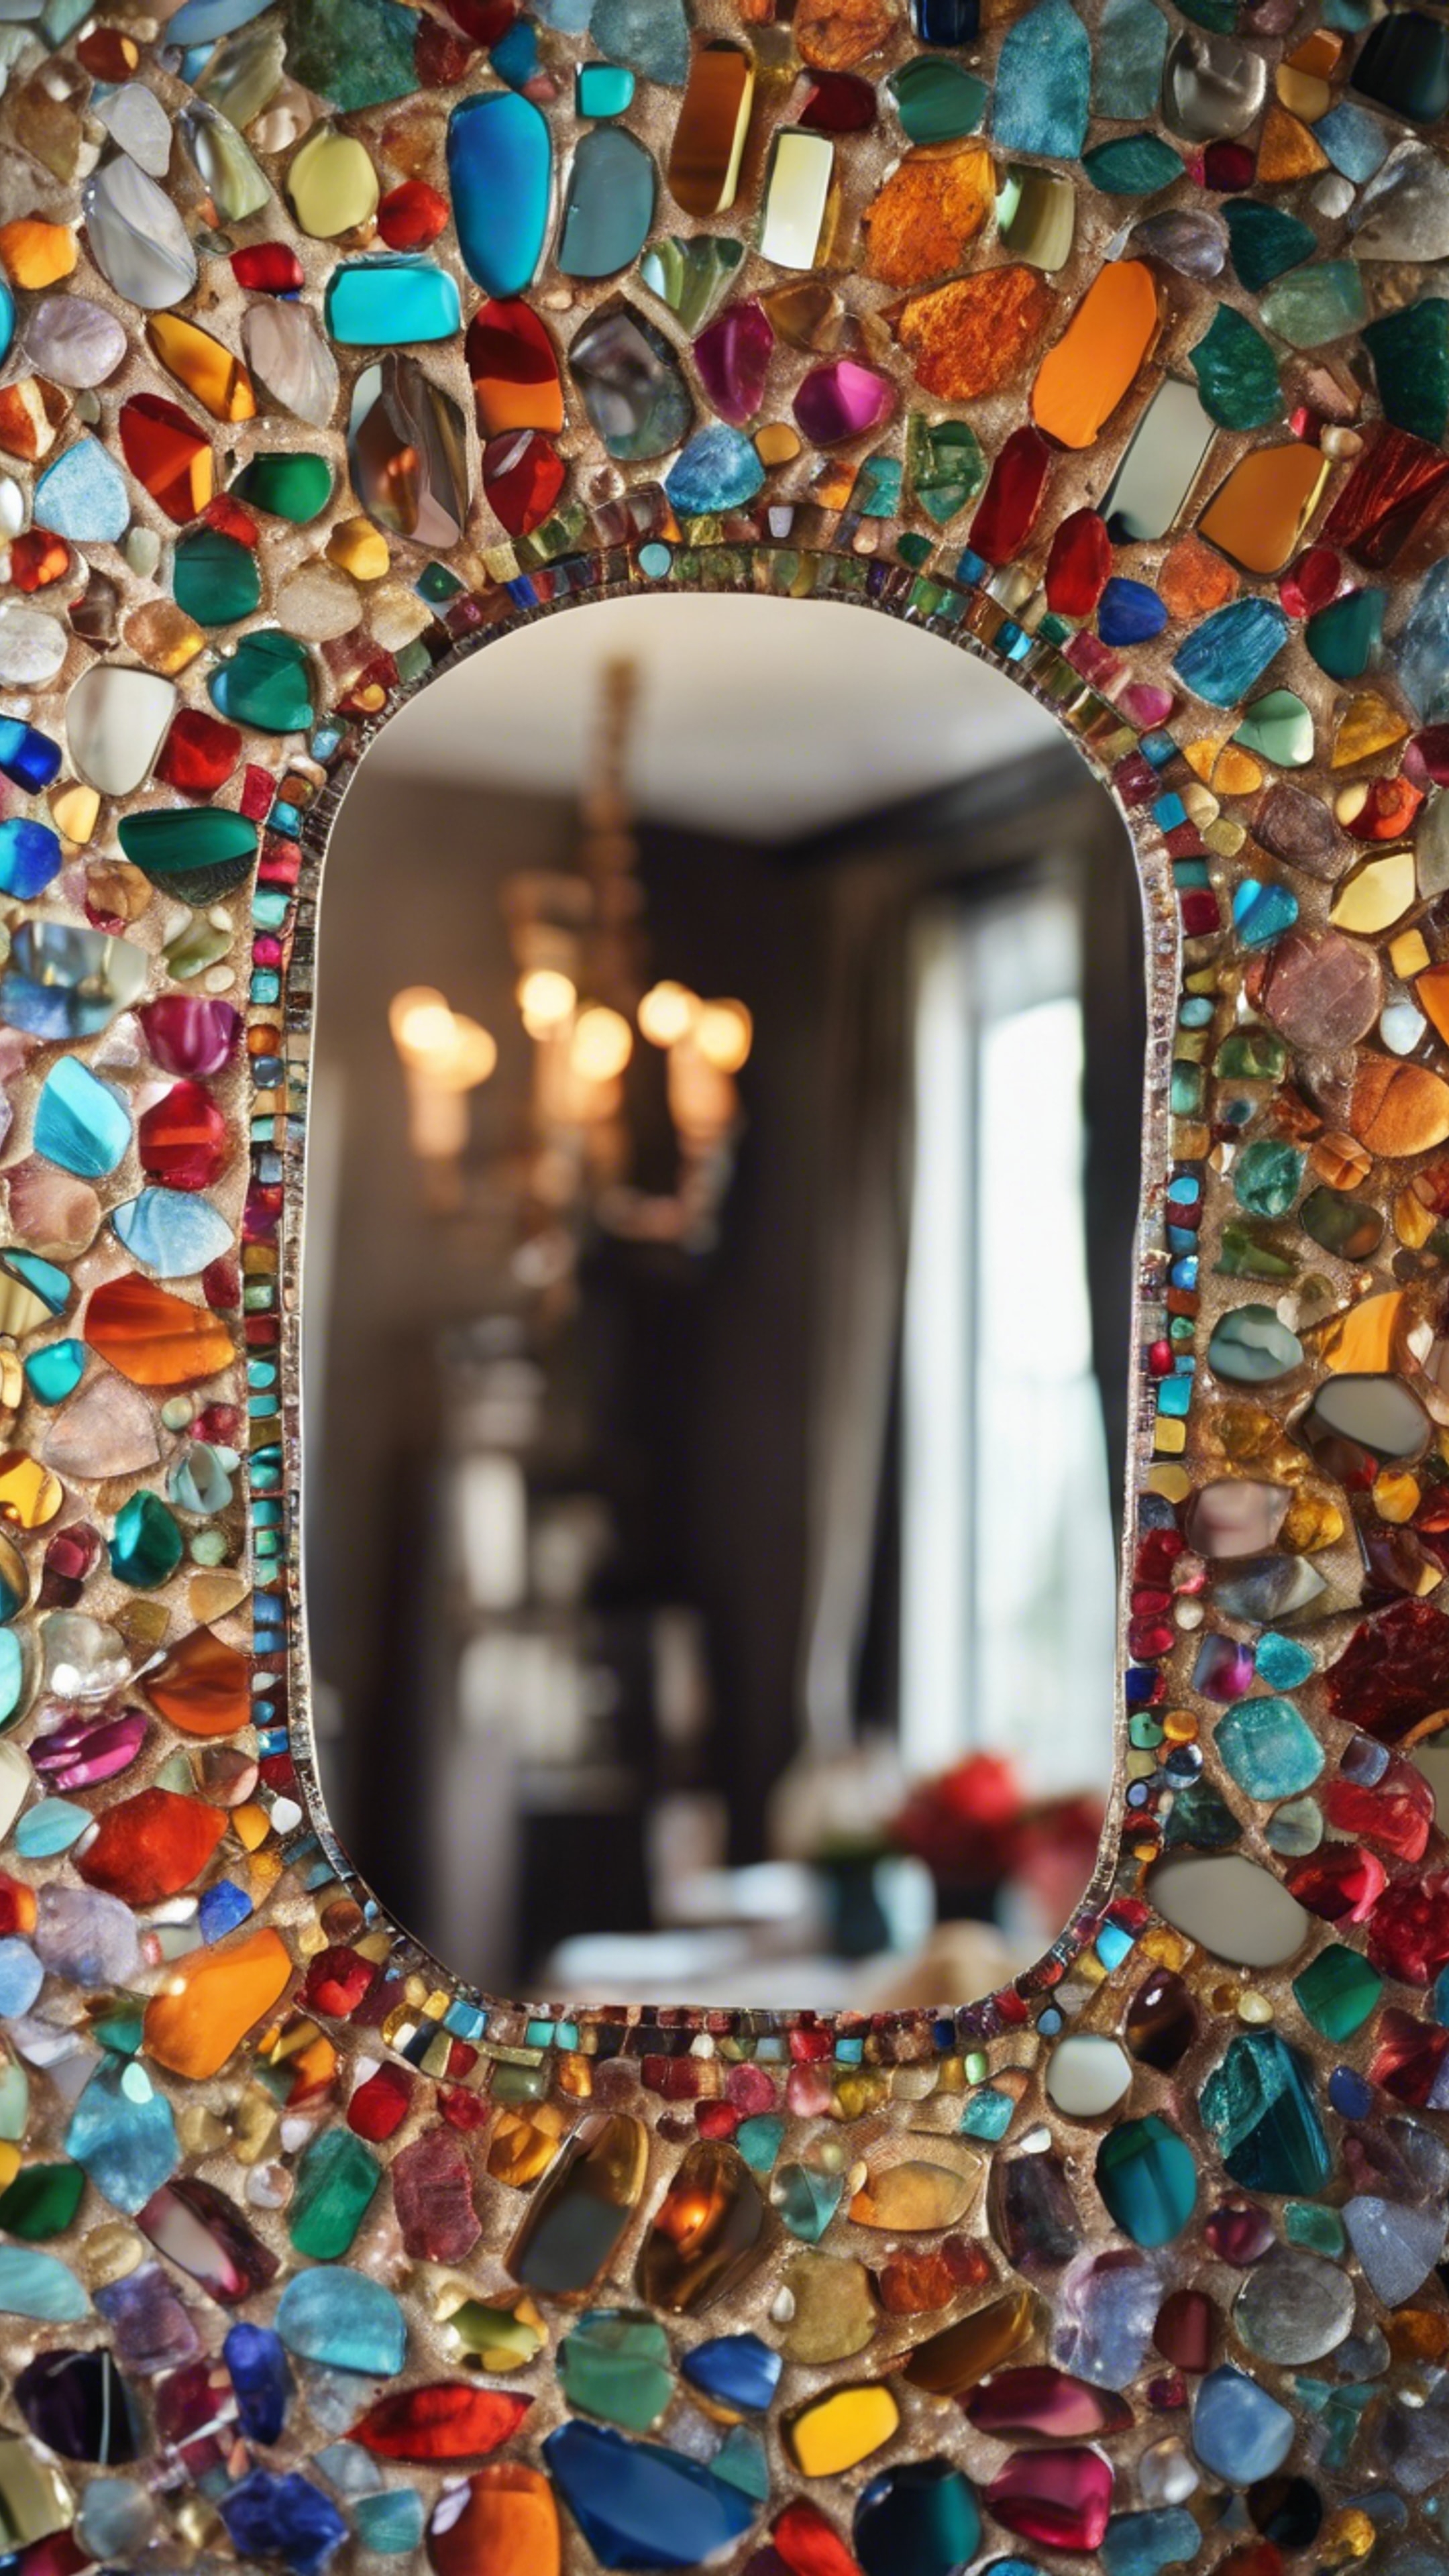 Handcrafted mosaic mirror with colorful glass pieces, reflecting a sunny boho-chic interior. Wallpaper[2b4a557ca8ad453390e2]